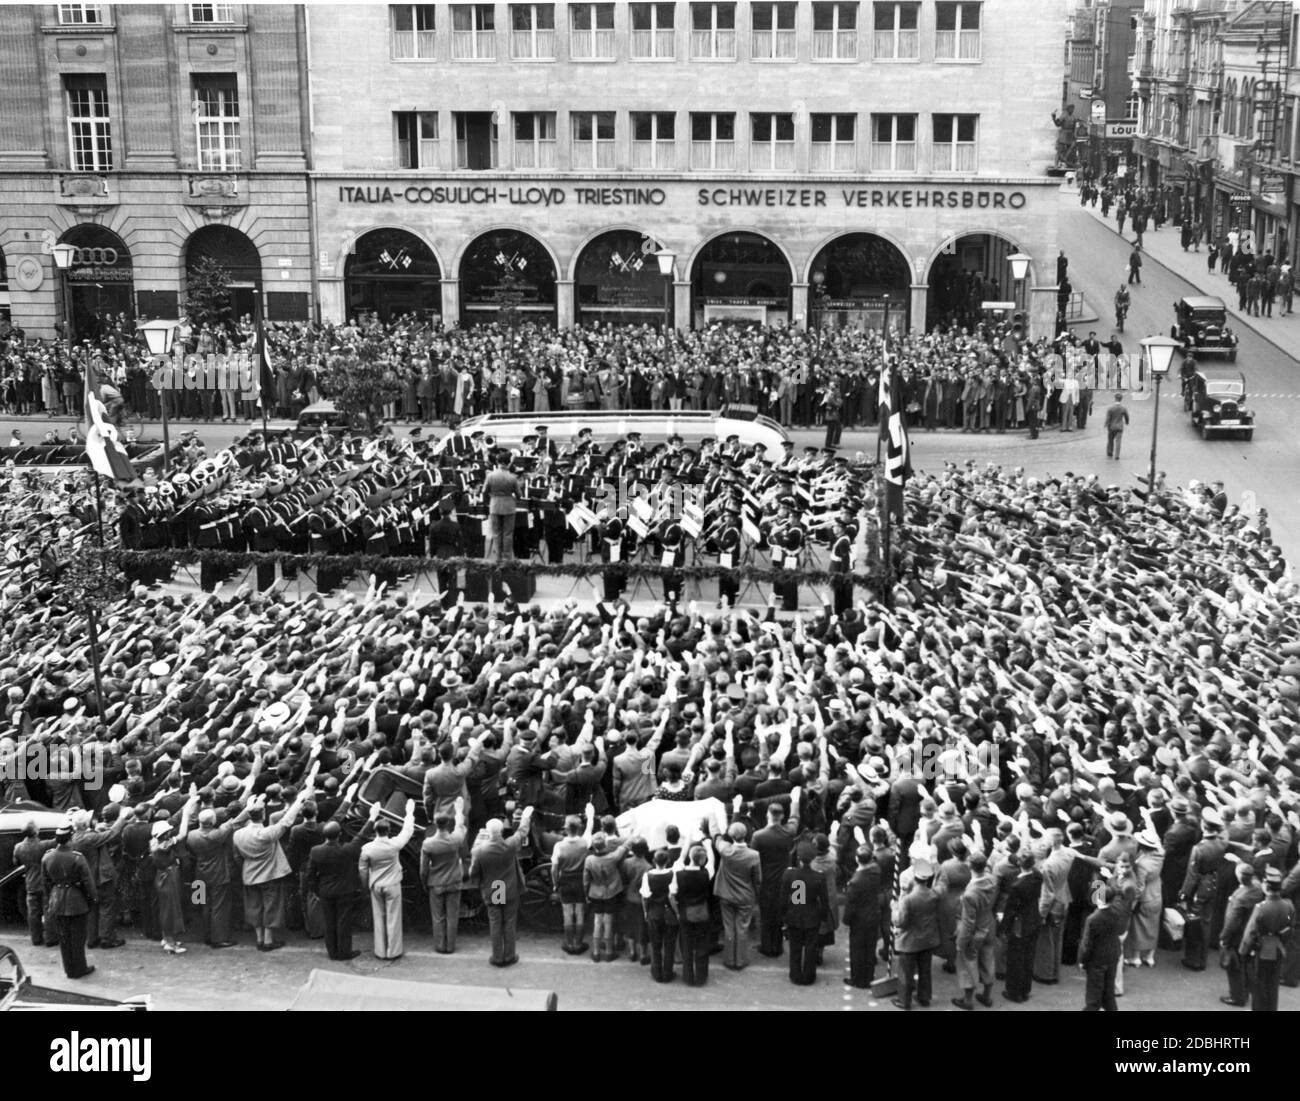 The Academia Musica of the Opera Nazionale Balilla (youth organization of the Italian fascists) plays a concert at the Kranzler-Ecke ( boulevard Unter den Linden, corner Friedrichstrasse) in Berlin in 1937. The crowd performs the Nazi salute. They stand in front of the Haus der Schweiz. On the left side there is a car dealer who sells the brands of Auto Union. Stock Photo